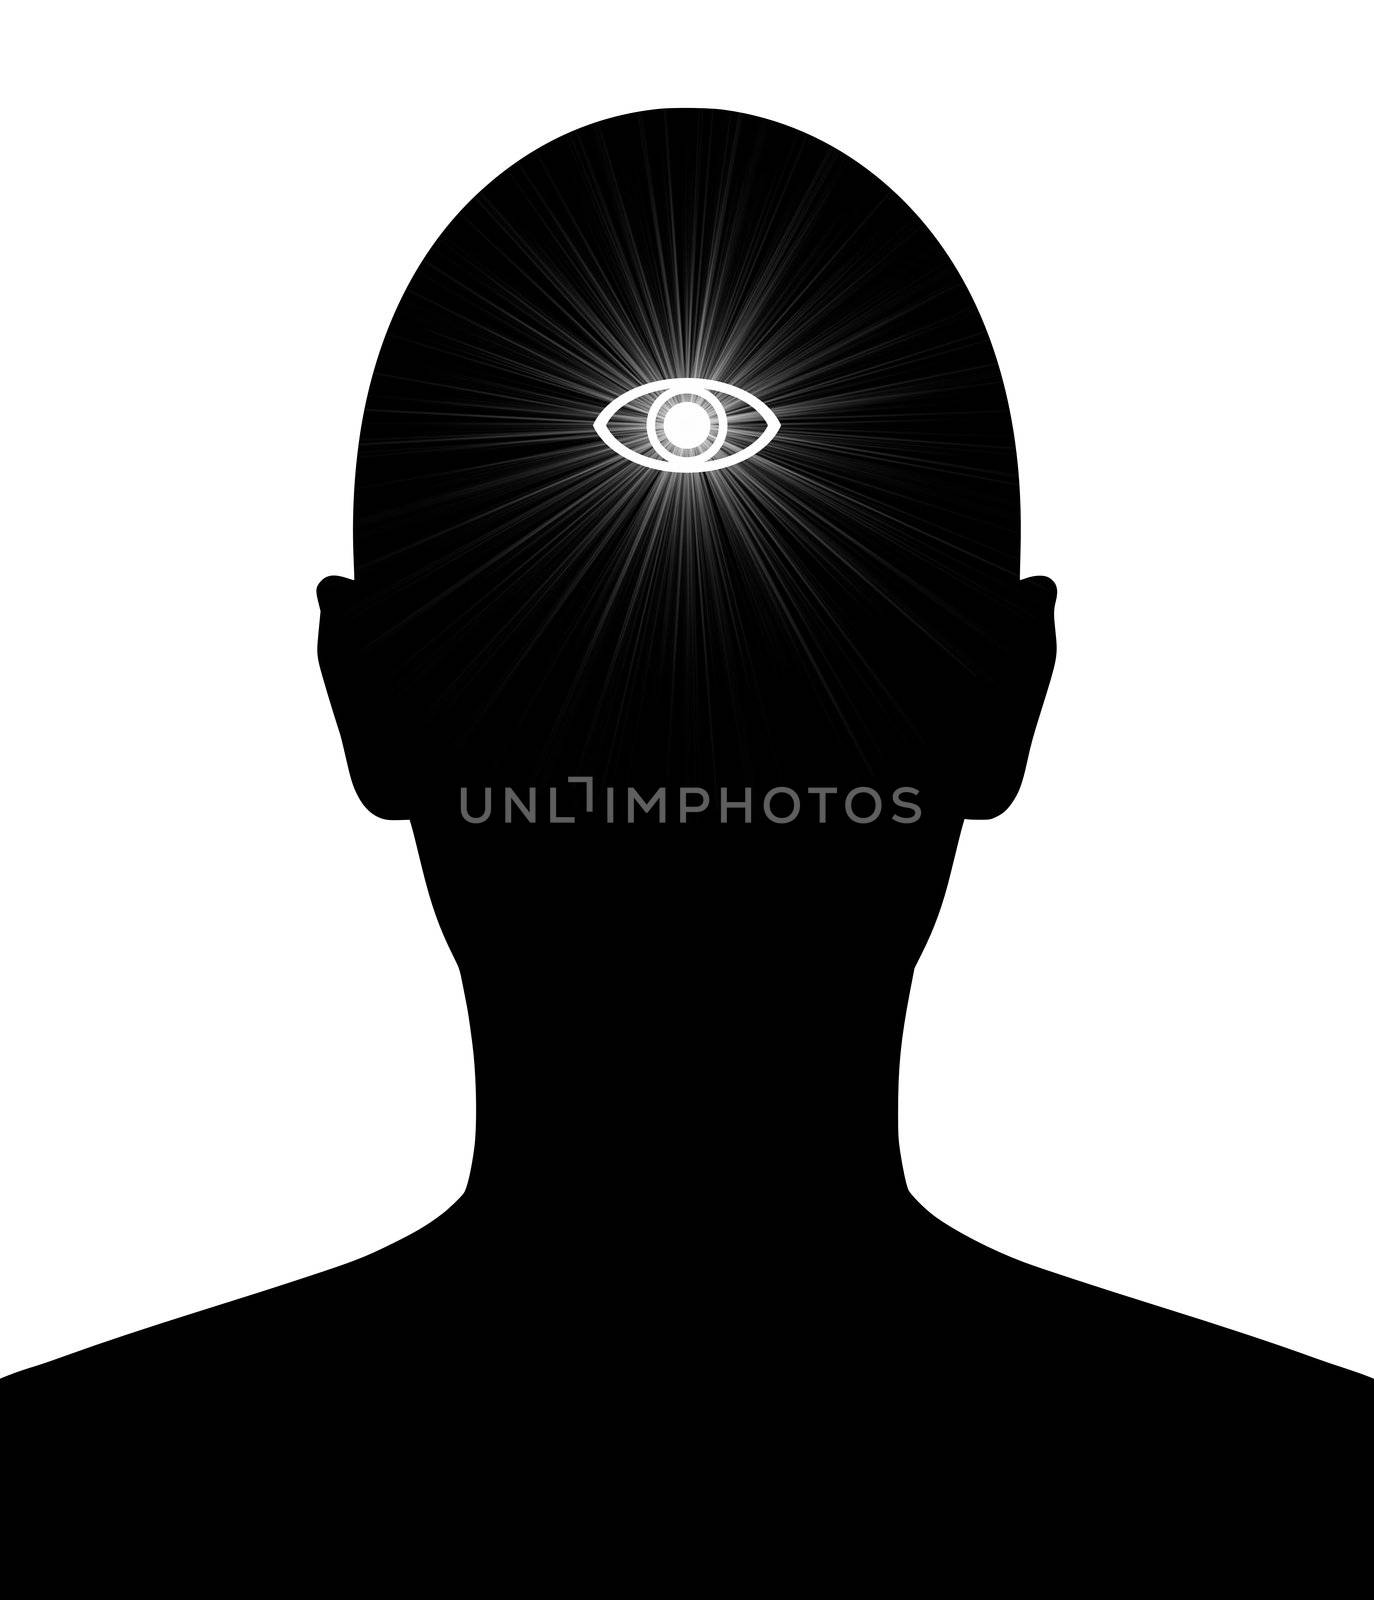 Illustrated silhouette of a person with the Hindu third eye of knowledge